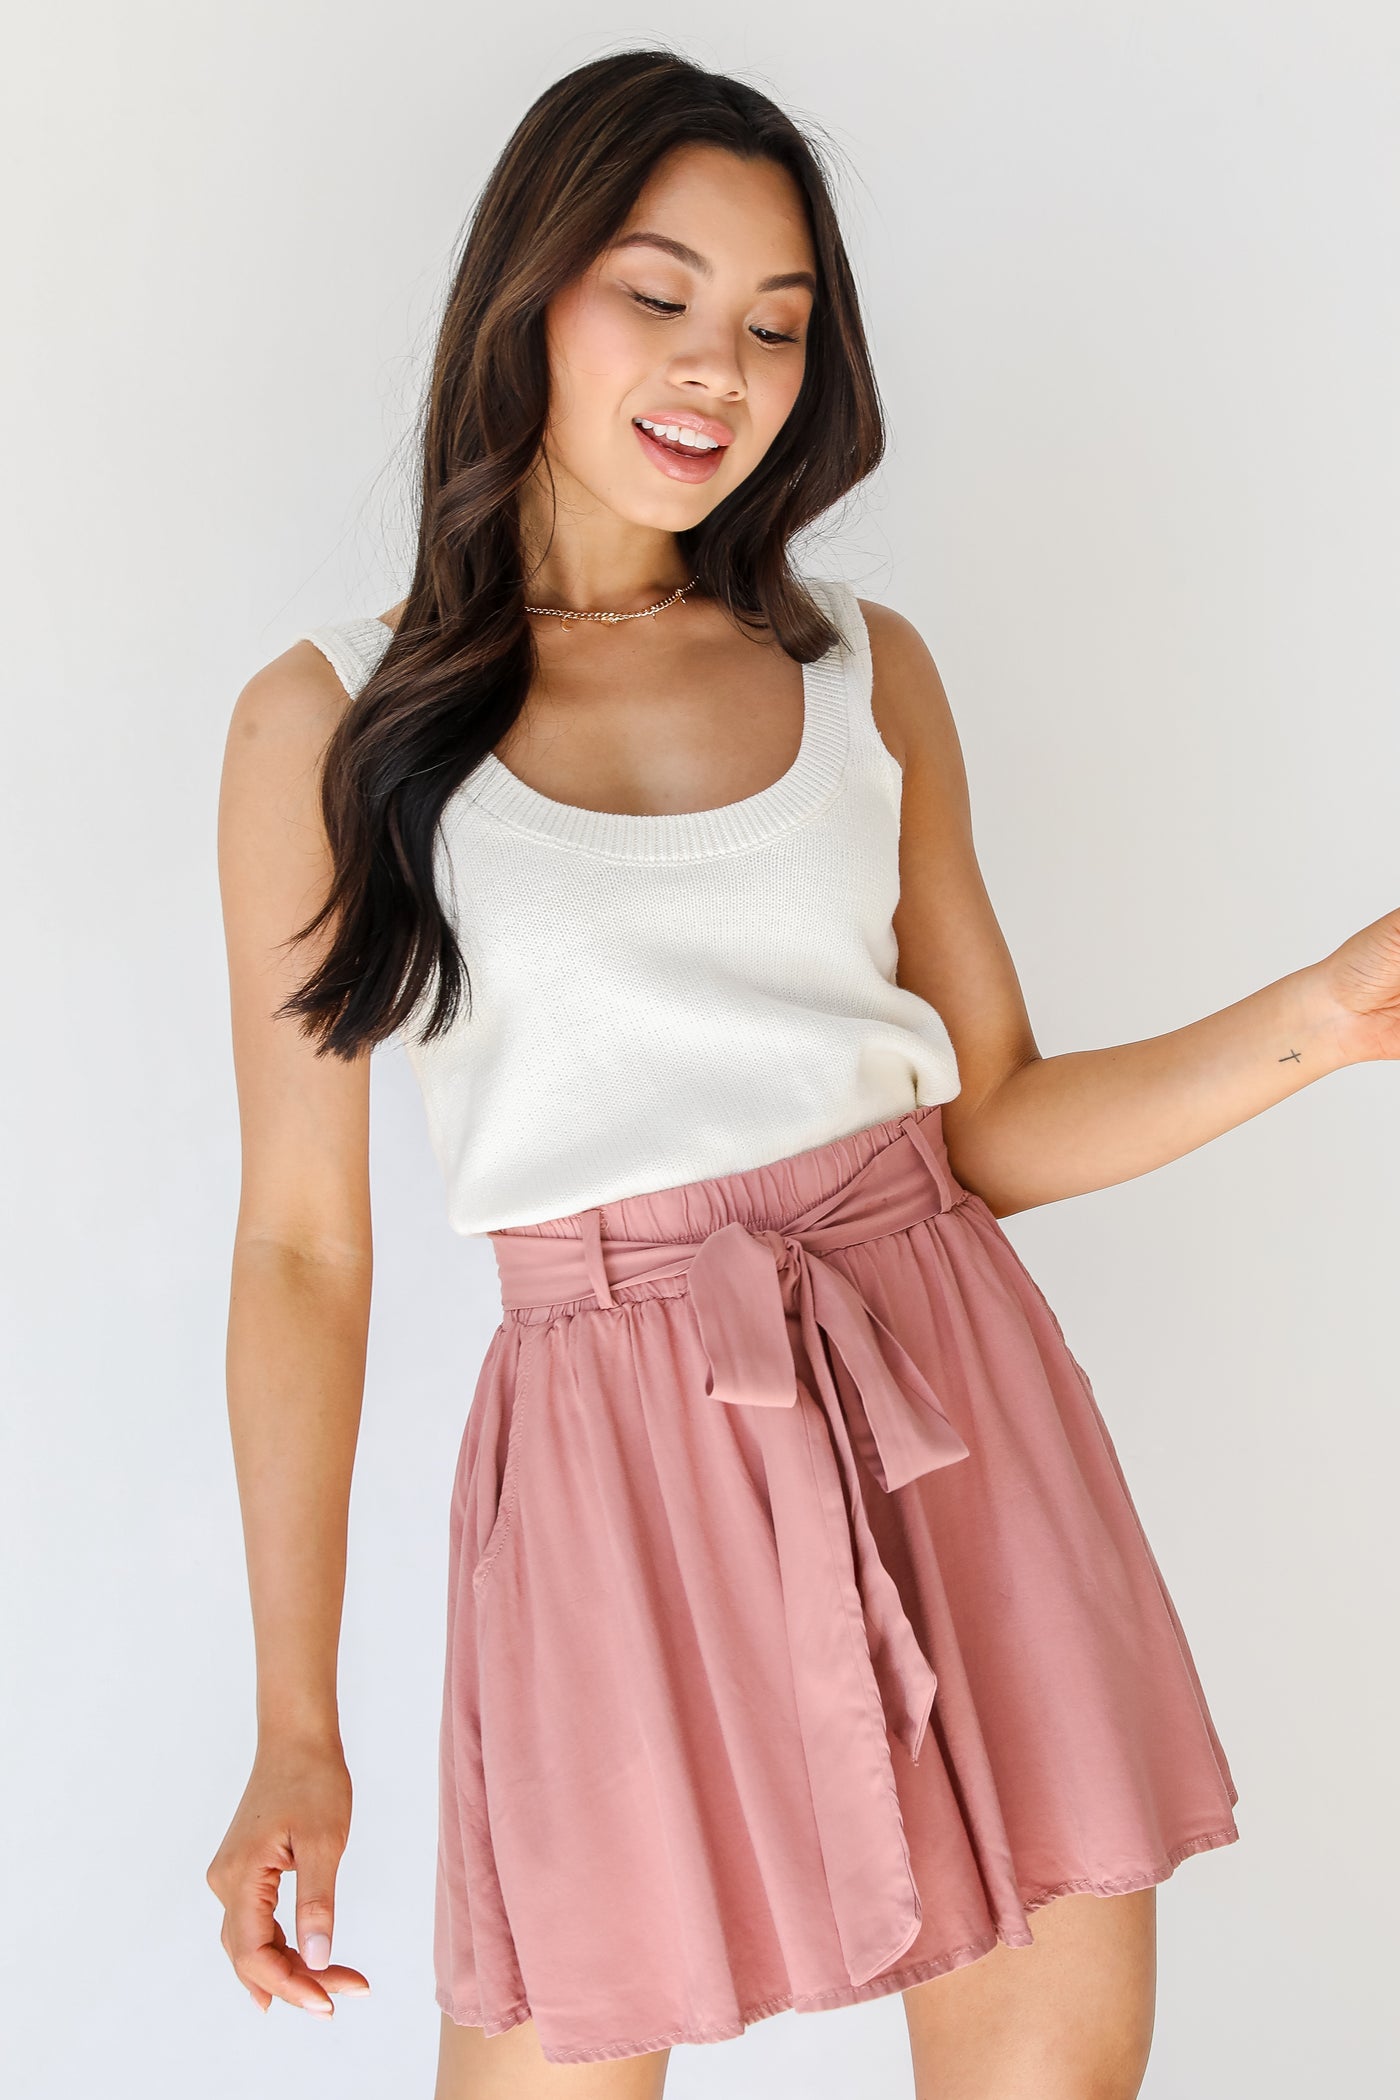 Shorts in mauve on model